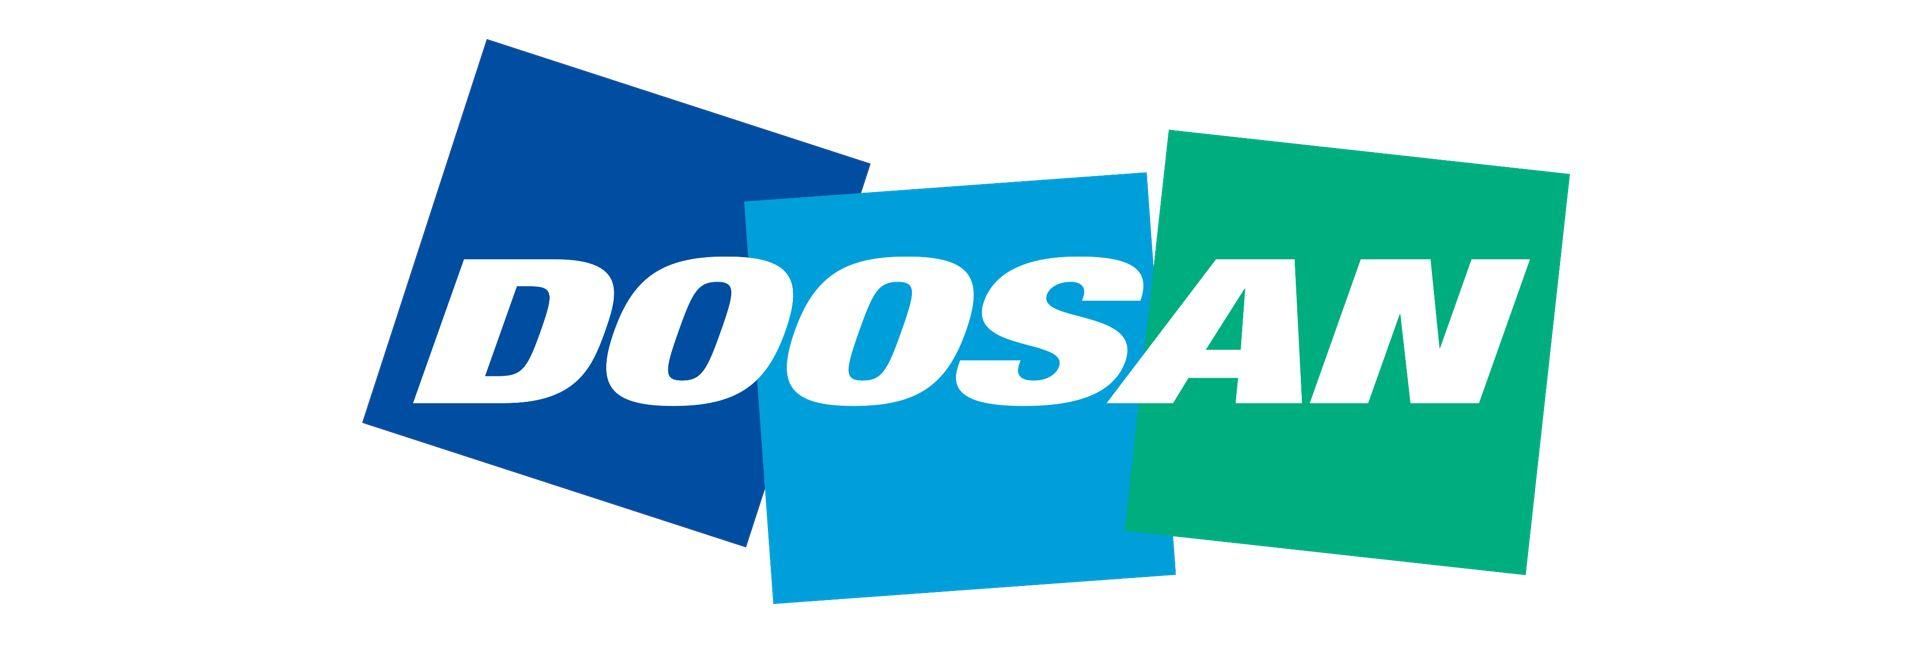 For the second time, Doosan decided to choose Hungary - VIDEO REPORT